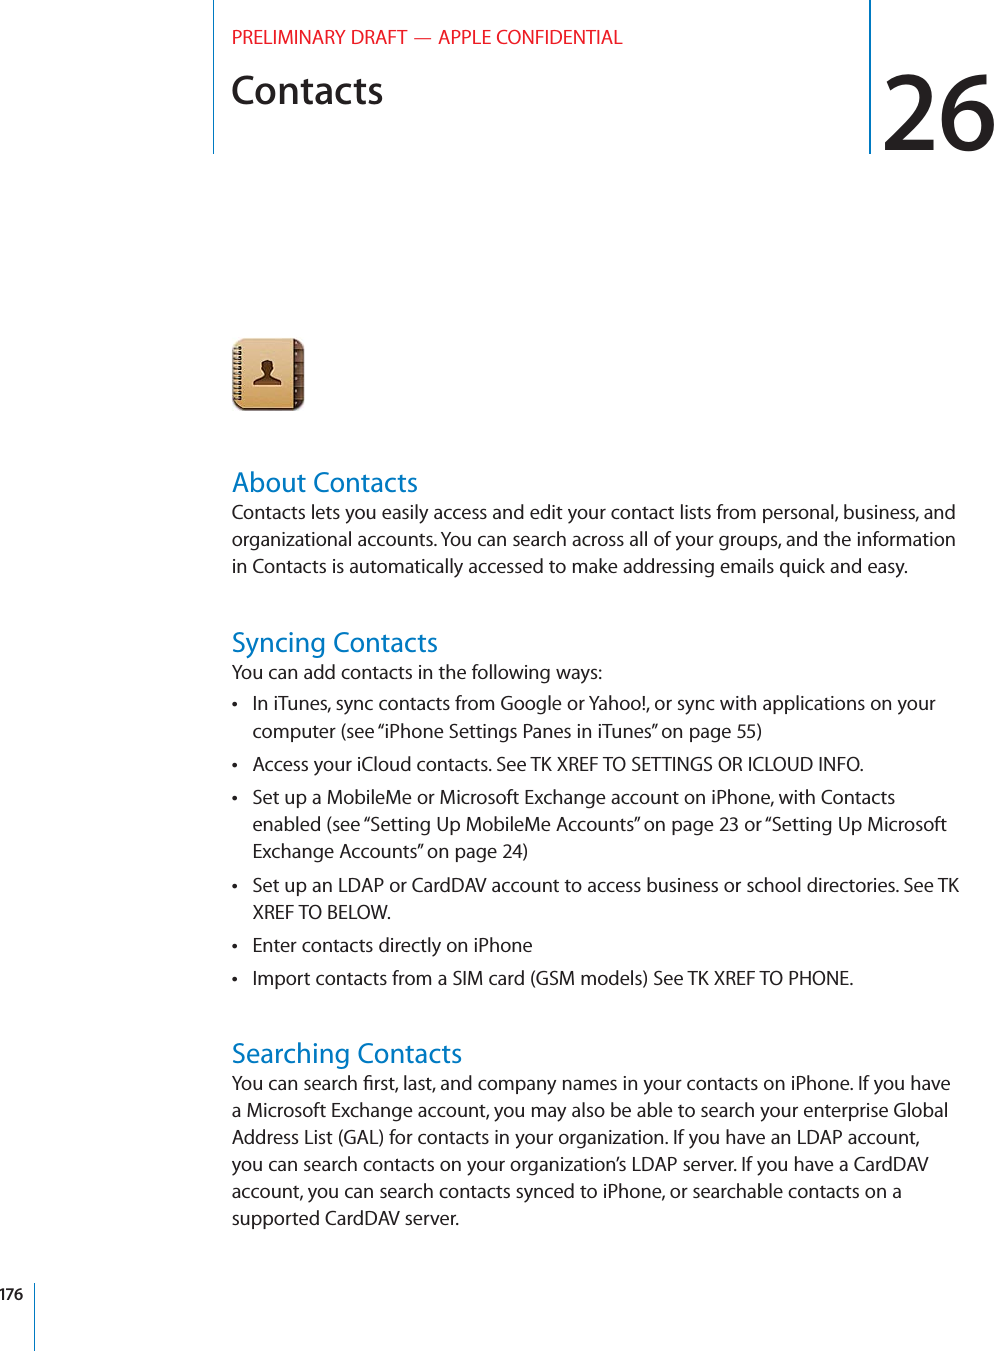 Contacts 26PRELIMINARY DRAFT — APPLE CONFIDENTIALAbout ContactsContacts lets you easily access and edit your contact lists from personal, business, and organizational accounts. You can search across all of your groups, and the information in Contacts is automatically accessed to make addressing emails quick and easy.Syncing ContactsYou can add contacts in the following ways:In iTunes, sync contacts from Google or Yahoo!, or sync with applications on your  computer (see “iPhone Settings Panes in iTunes” on page 55)Access your iCloud contacts. See TK XREF TO SETTINGS OR ICLOUD INFO. Set up a MobileMe or Microsoft Exchange account on iPhone, with Contacts  enabled (see “Setting Up MobileMe Accounts” on page 23 or “Setting Up Microsoft Exchange Accounts” on page 24)Set up an LDAP or CardDAV account to access business or school directories. See TK  XREF TO BELOW.Enter contacts directly on iPhone Import contacts from a SIM card (GSM models) See TK XREF TO PHONE. Searching ContactsYou can search ﬁrst, last, and company names in your contacts on iPhone. If you have a Microsoft Exchange account, you may also be able to search your enterprise Global Address List (GAL) for contacts in your organization. If you have an LDAP account, you can search contacts on your organization’s LDAP server. If you have a CardDAV account, you can search contacts synced to iPhone, or searchable contacts on a supported CardDAV server. 176